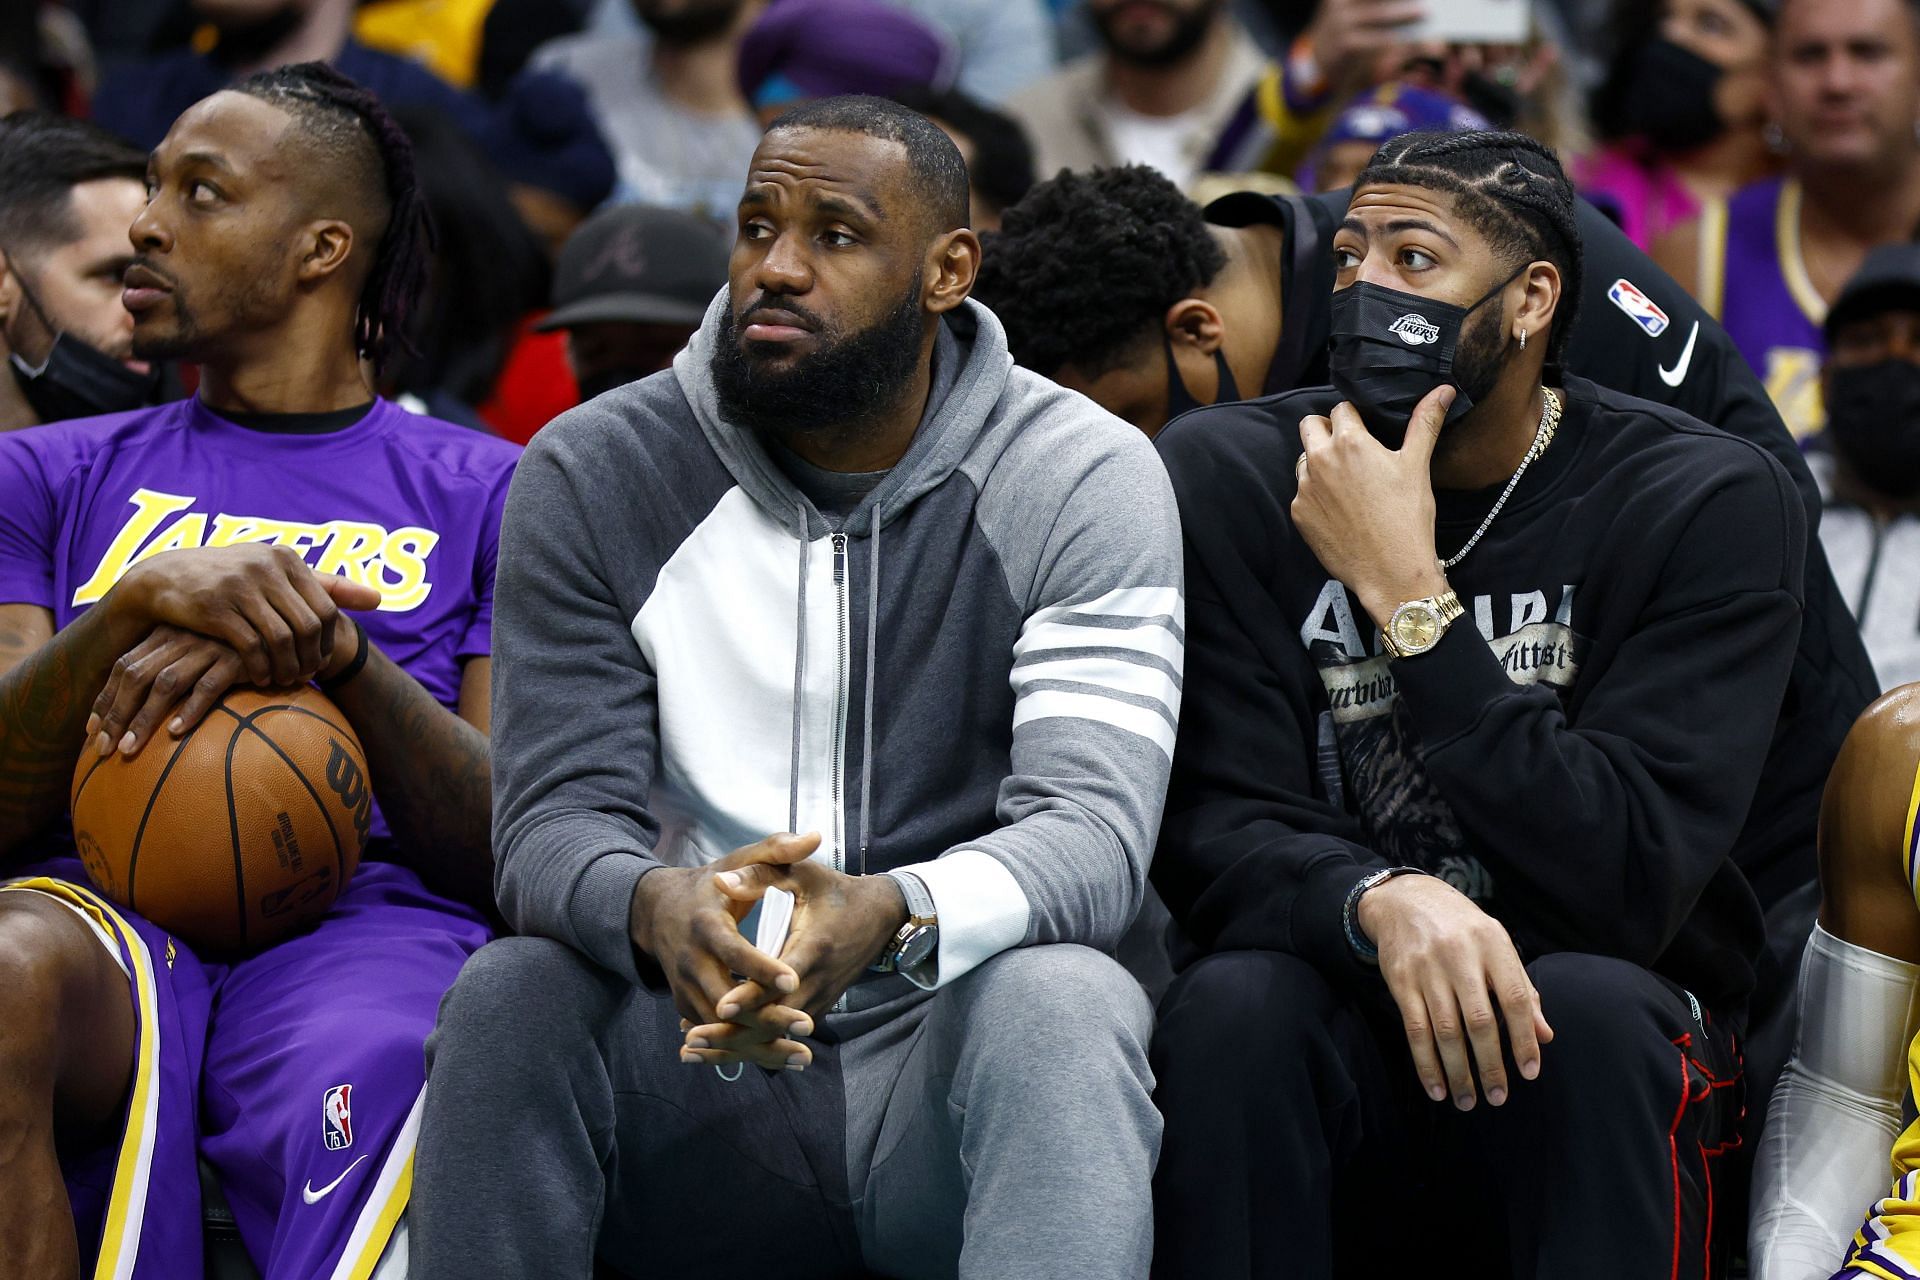 LeBron James, middle, on the sideline against the Hornets